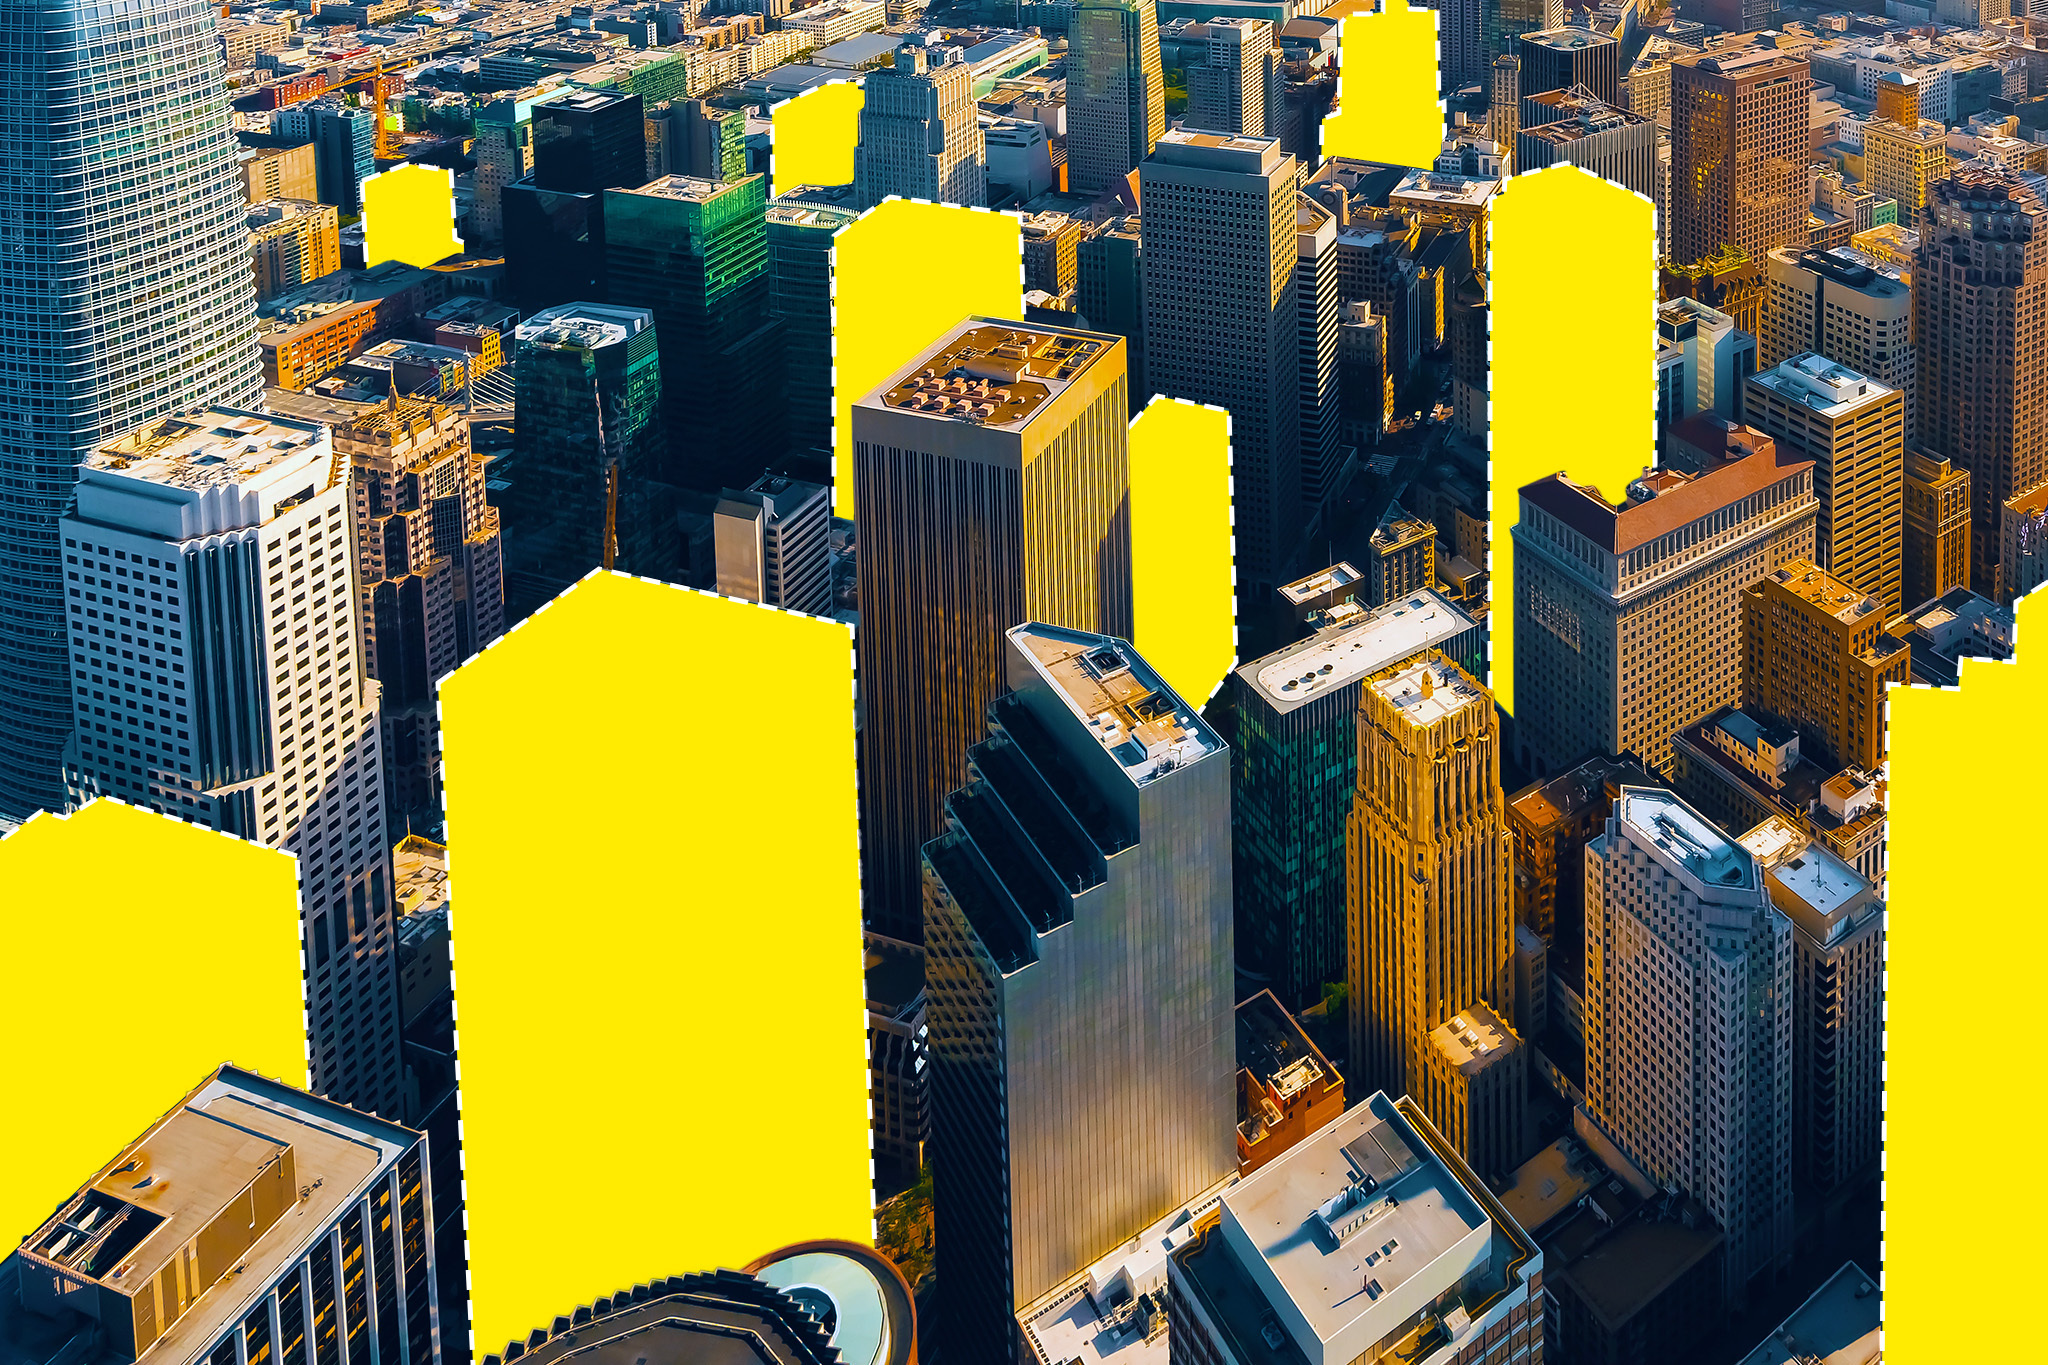 Aerial cityscape with large sections obscured by yellow shapes.